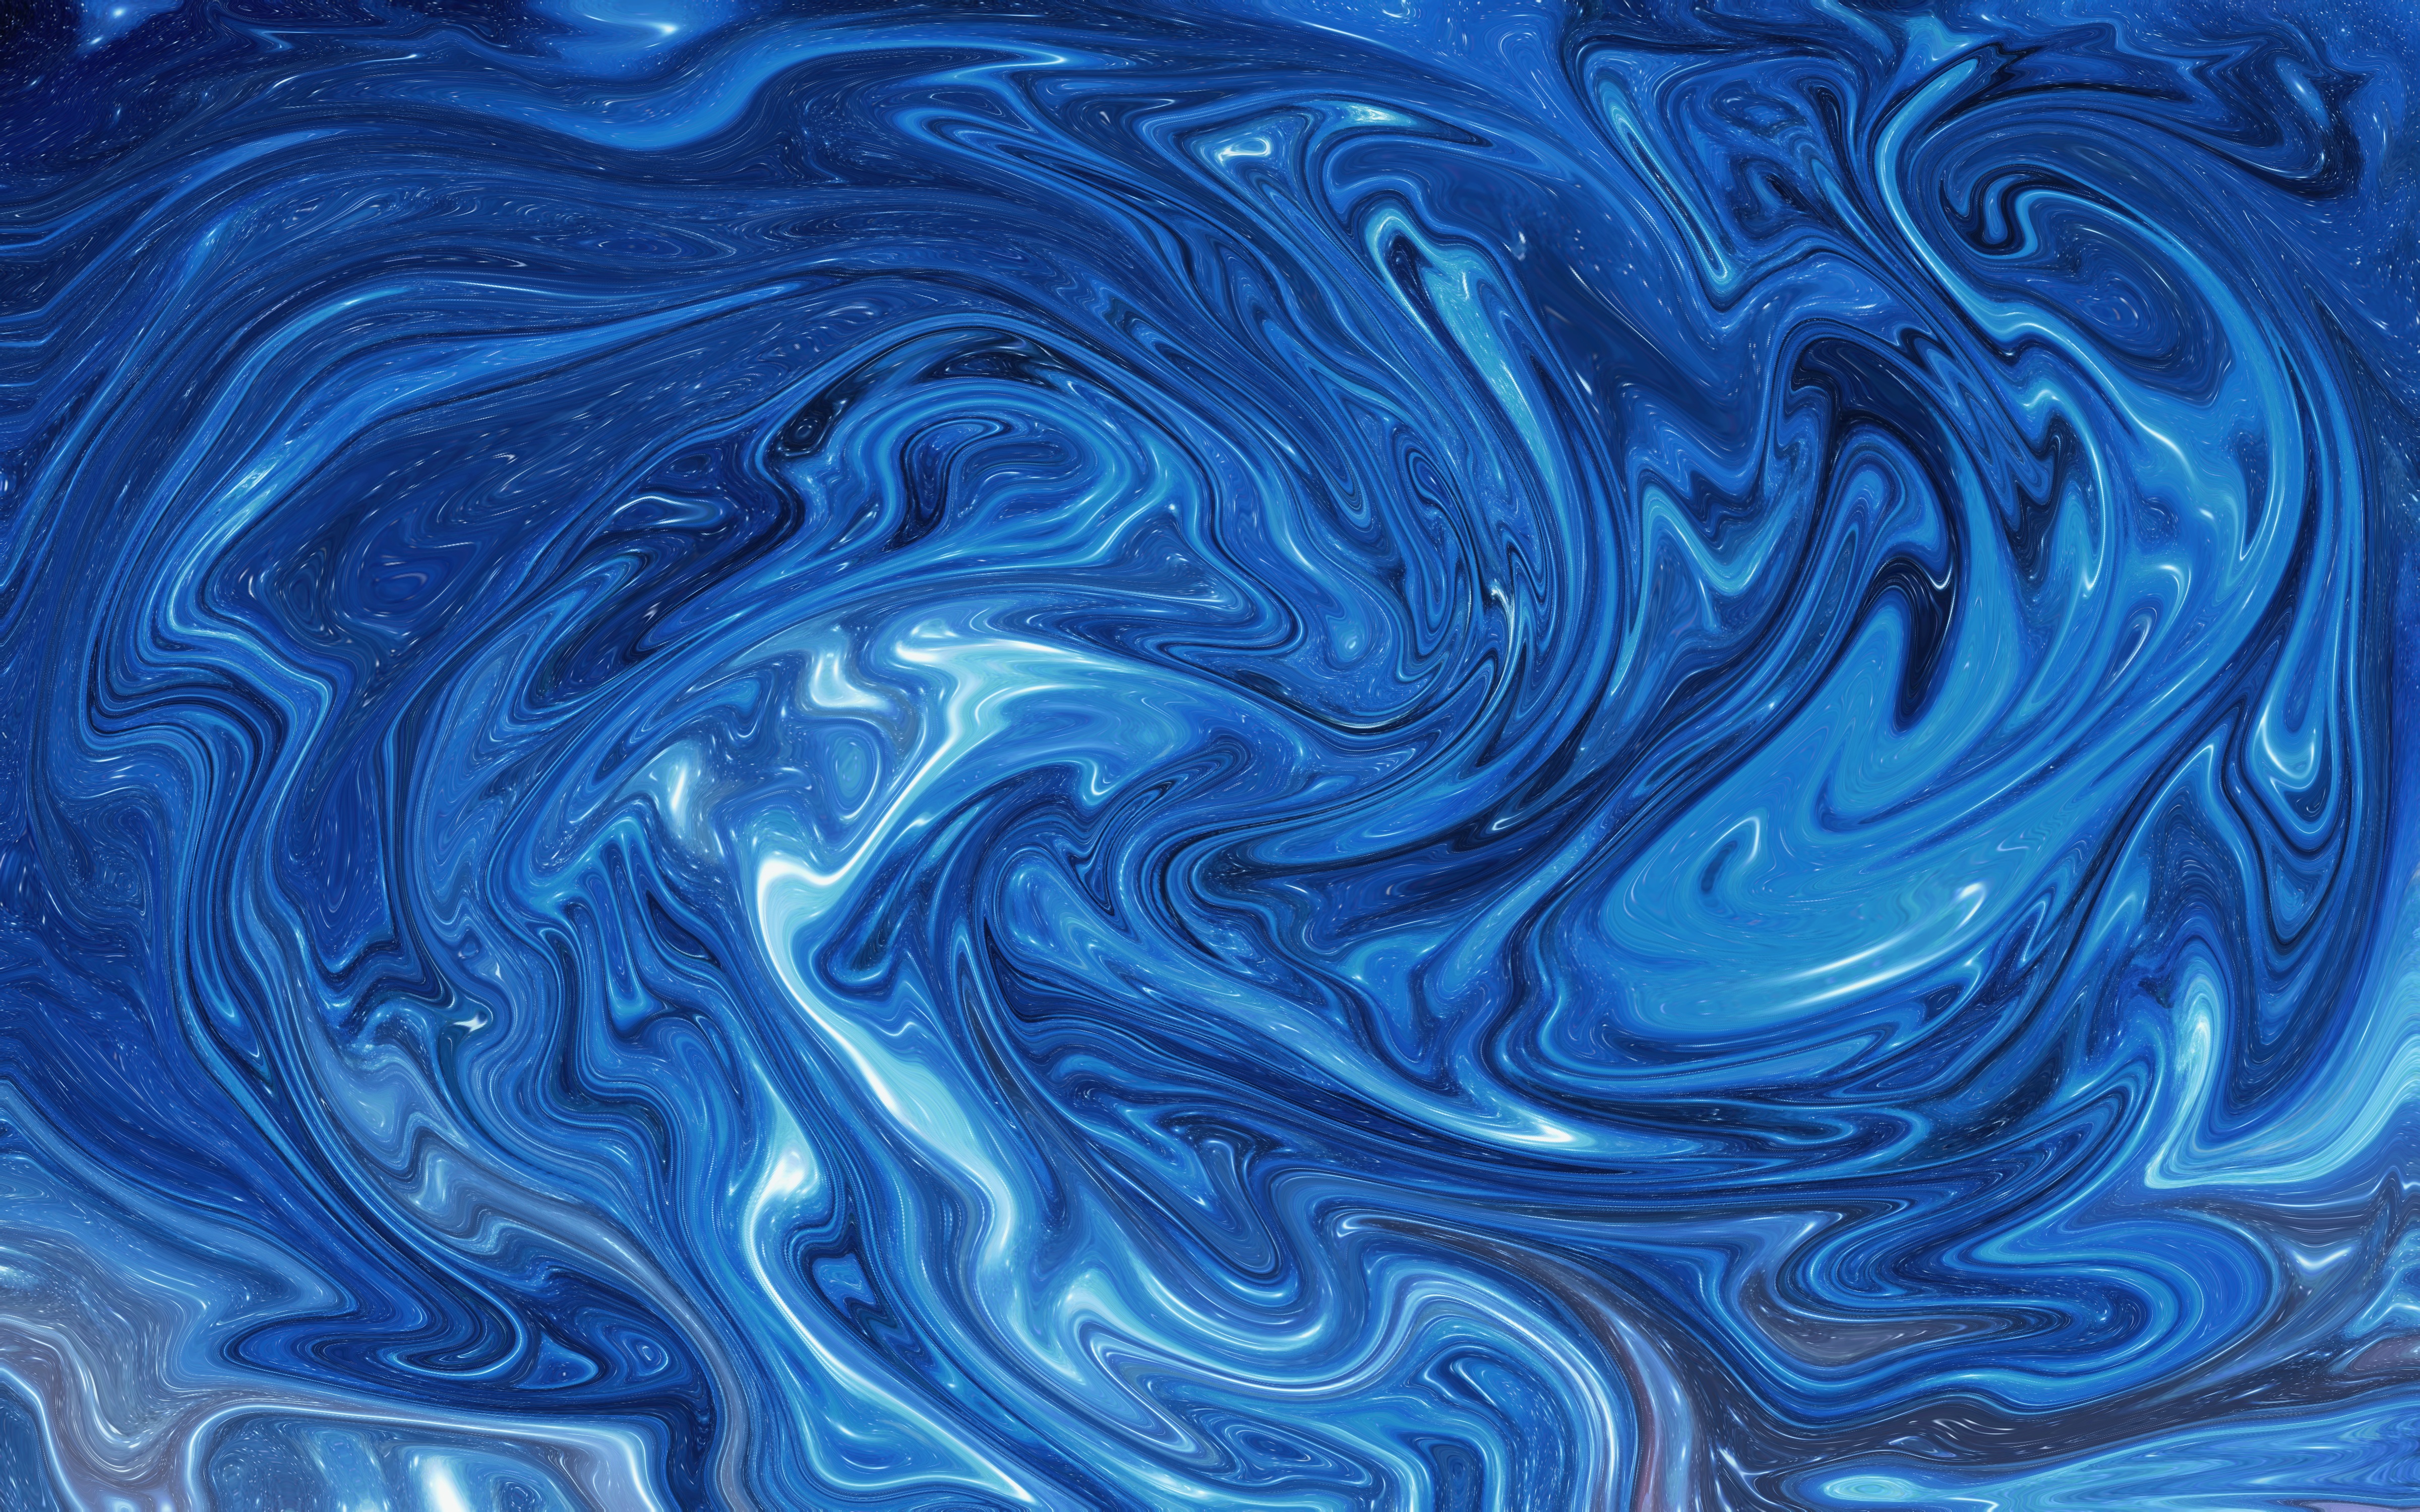 Best Ripple wallpapers for phone screen